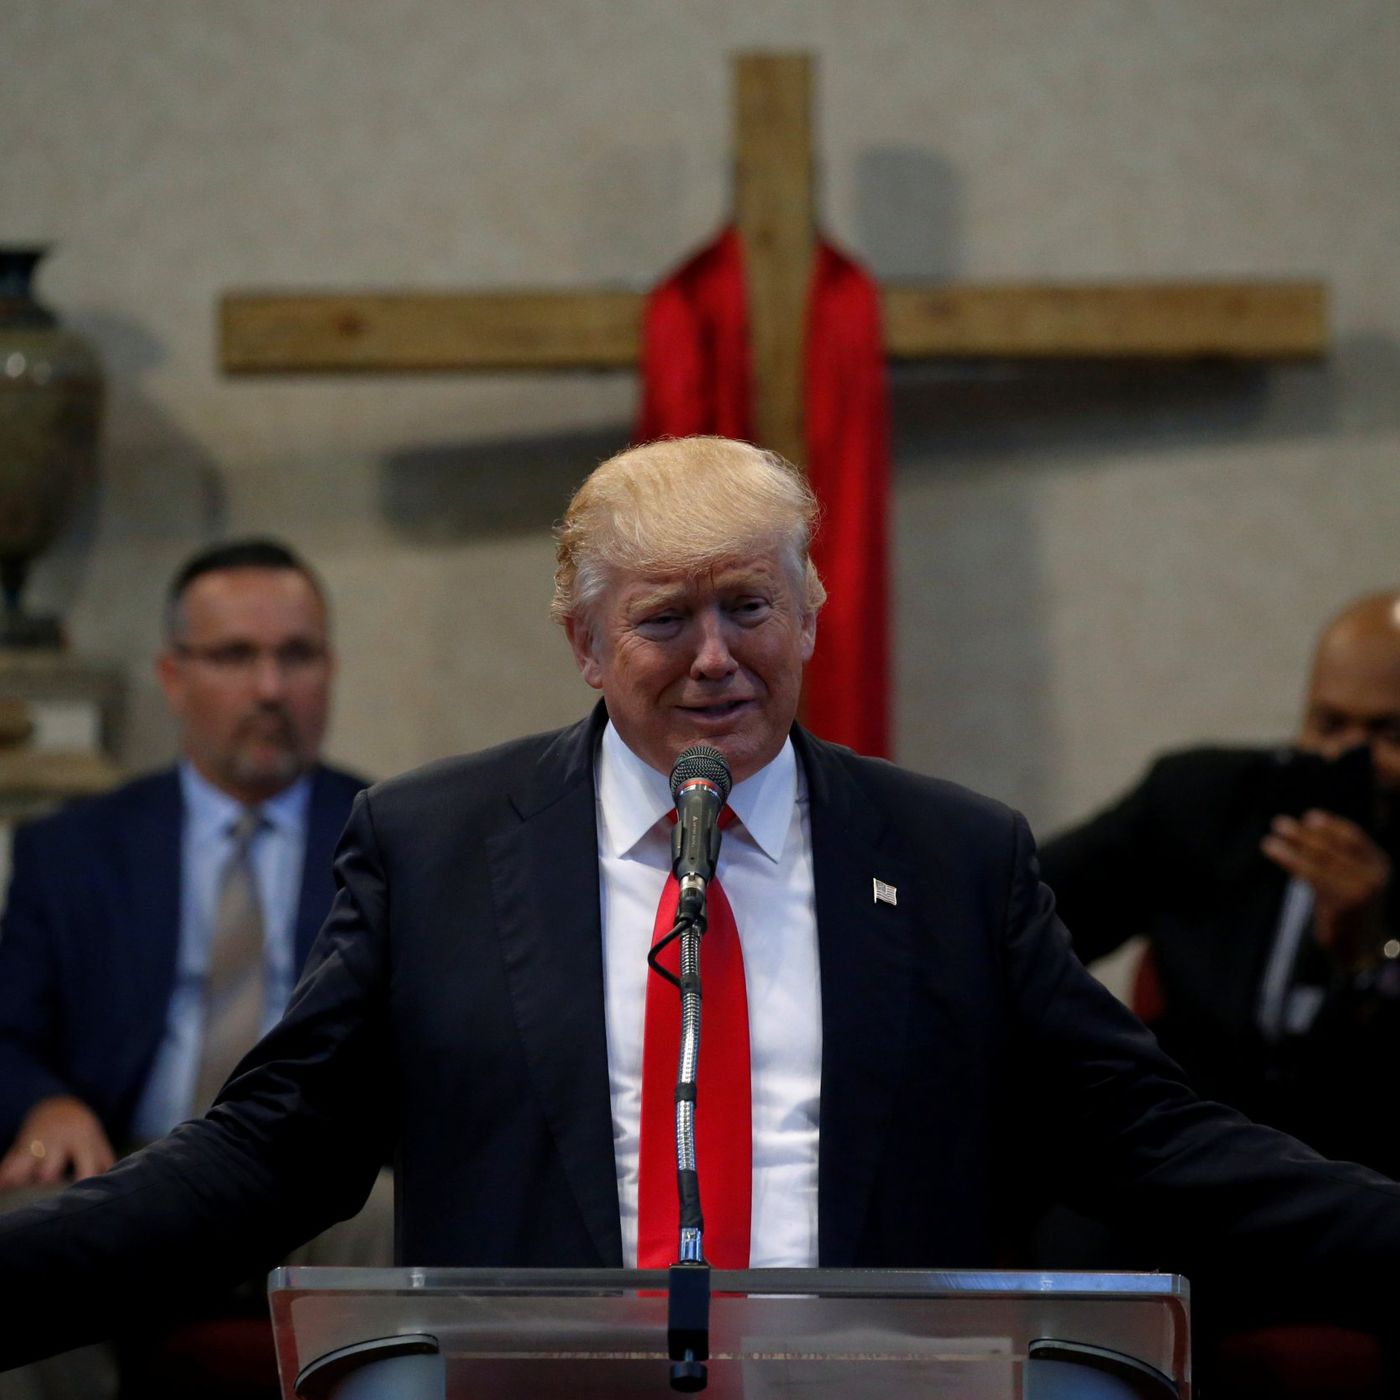 Trump and religion: 'A battle of heresy versus Christian truth'